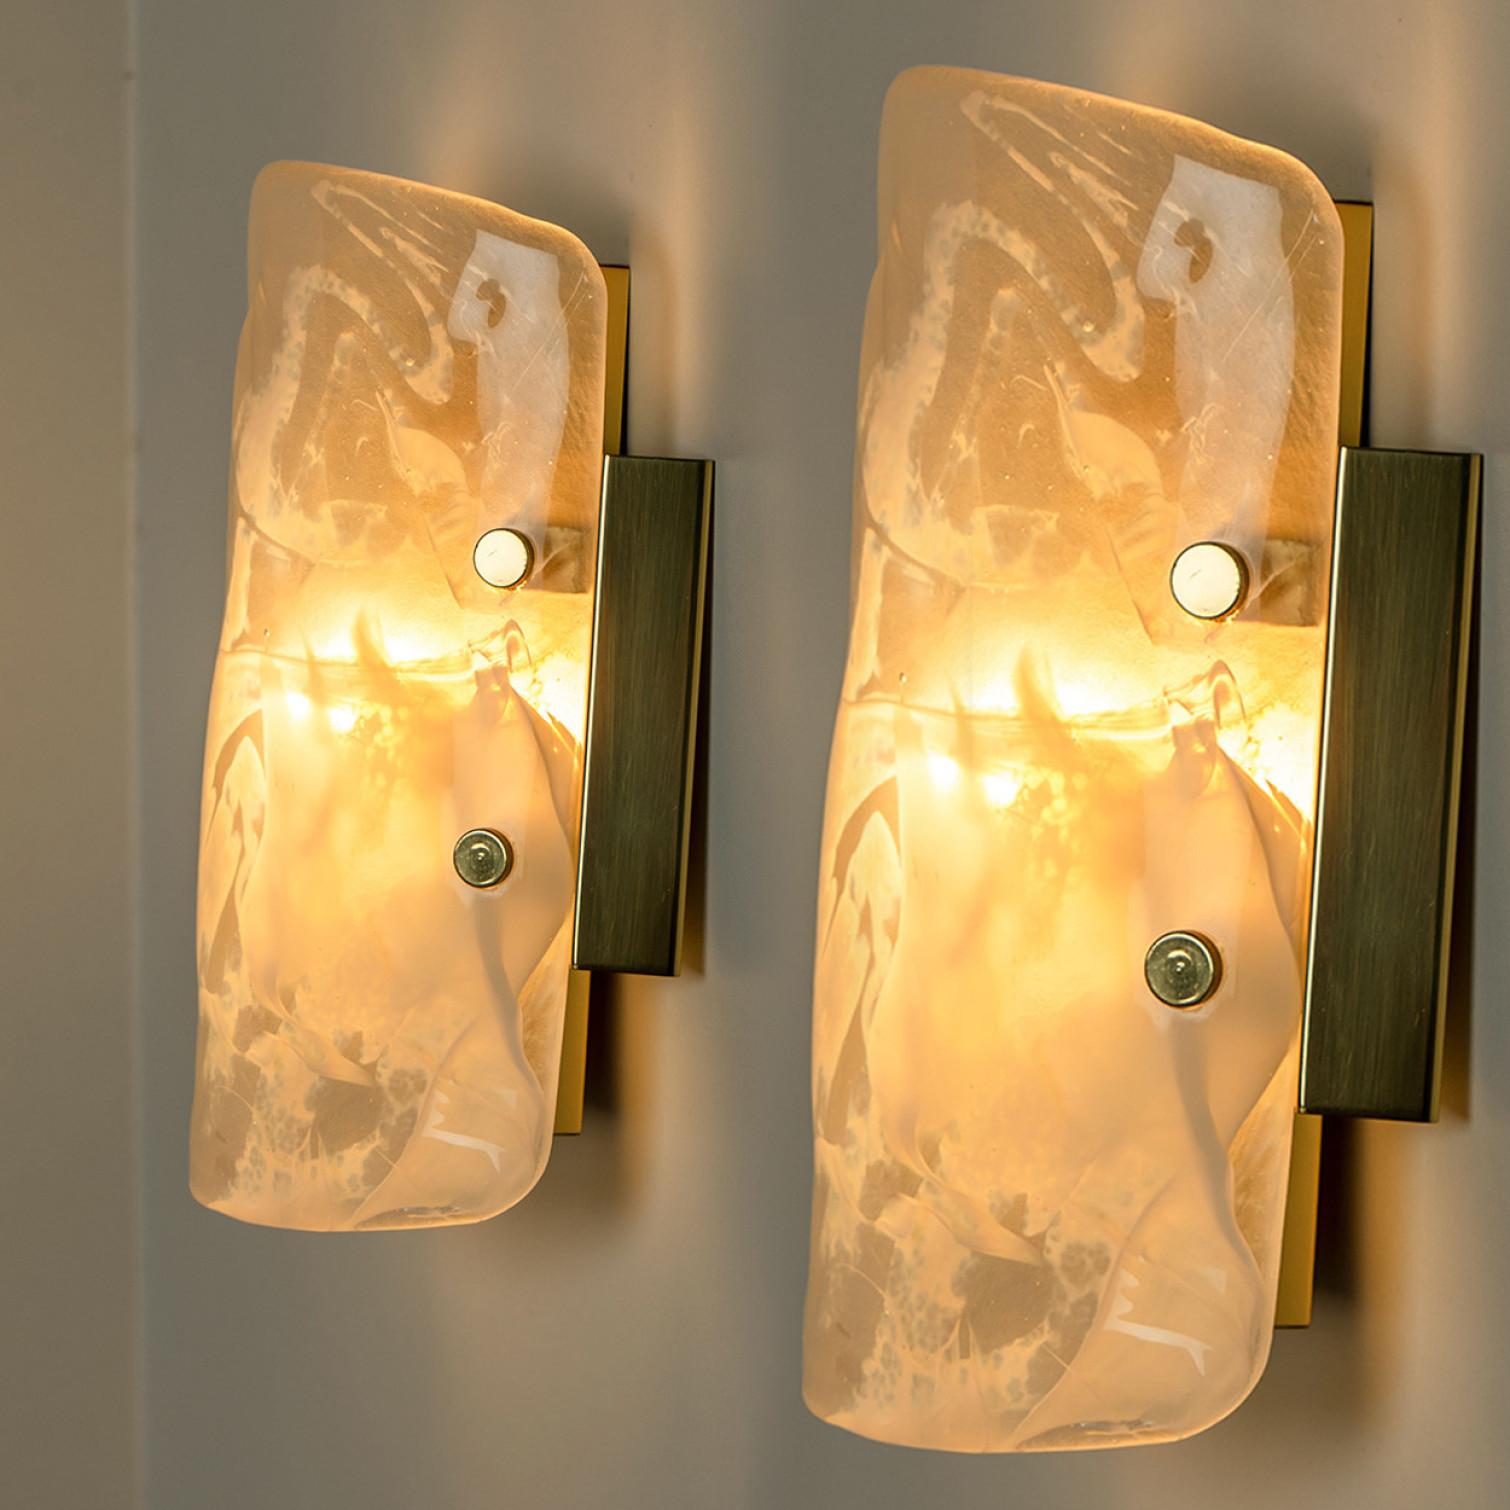 Hillebrand Marble Murano Glass Wall Light Fixtures, 1960s For Sale 3